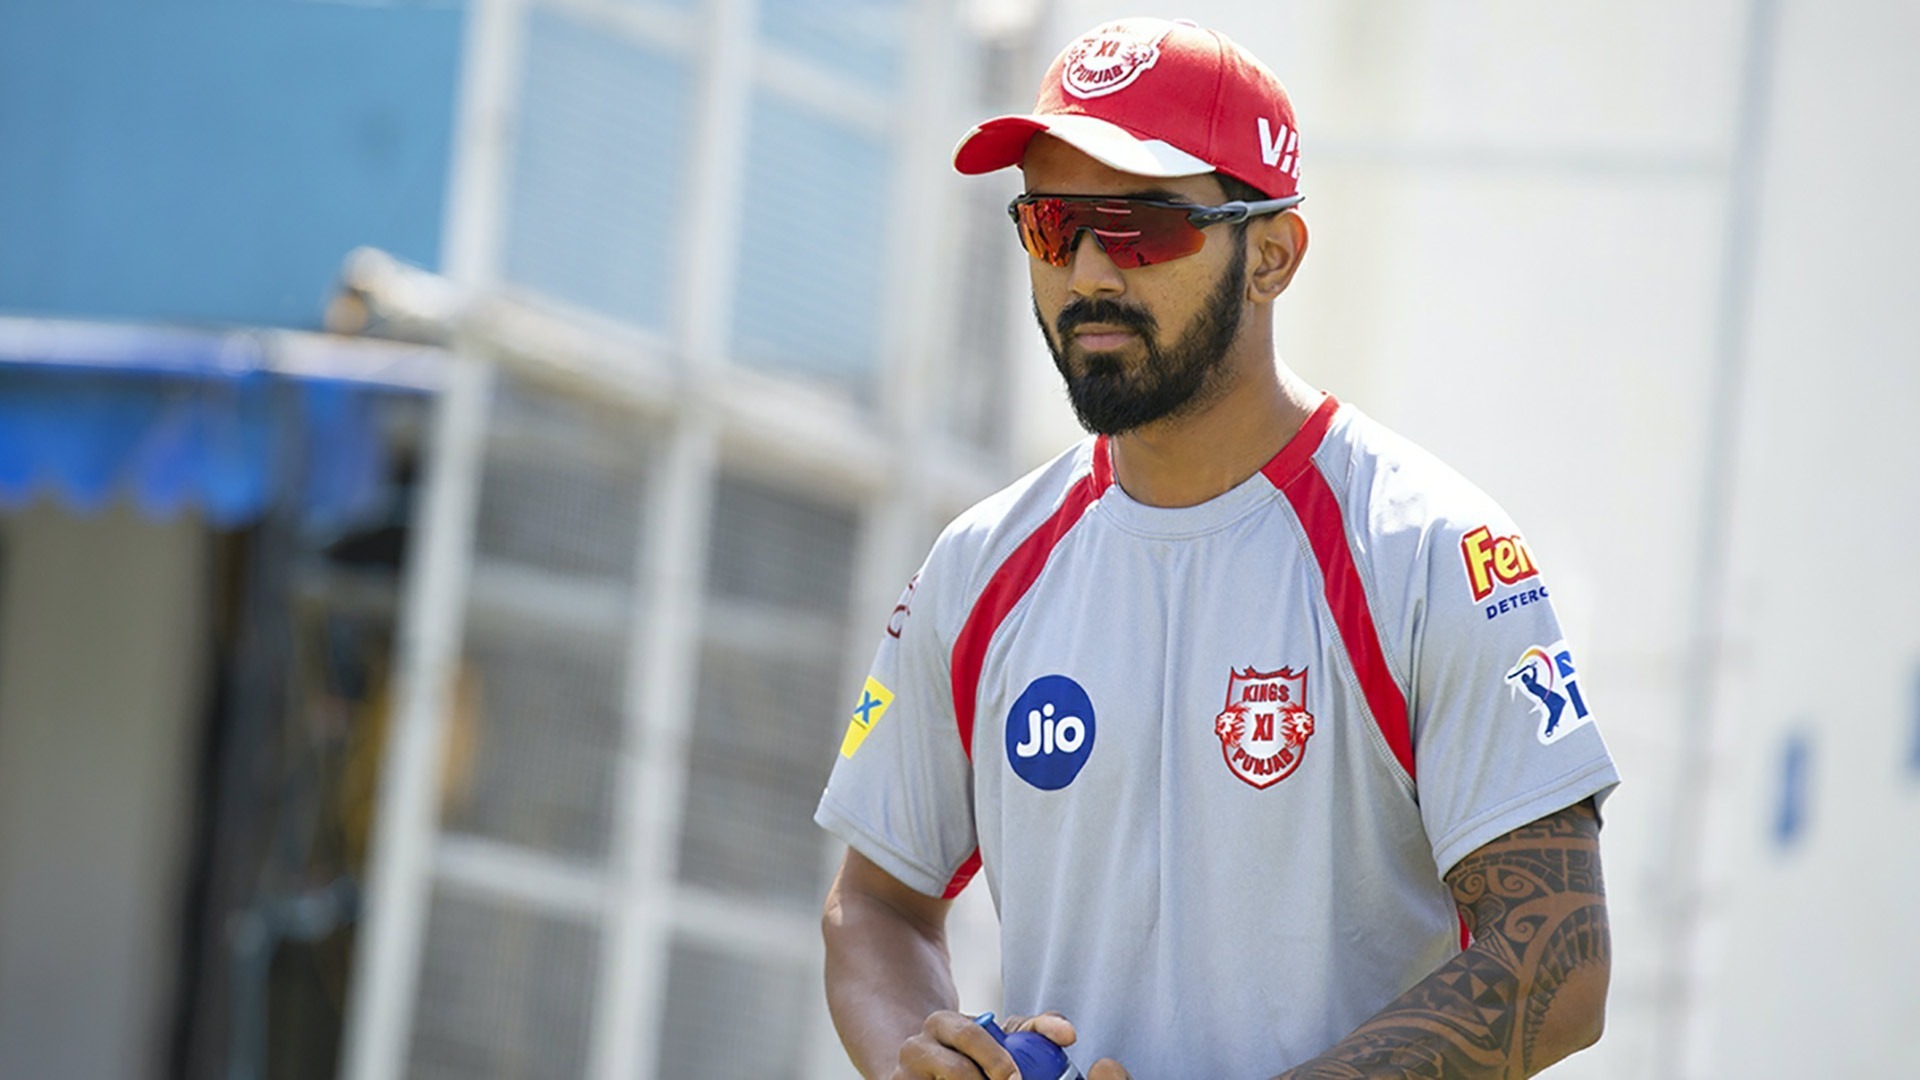 Kings XI Punjab become the IPL franchise with most skippers